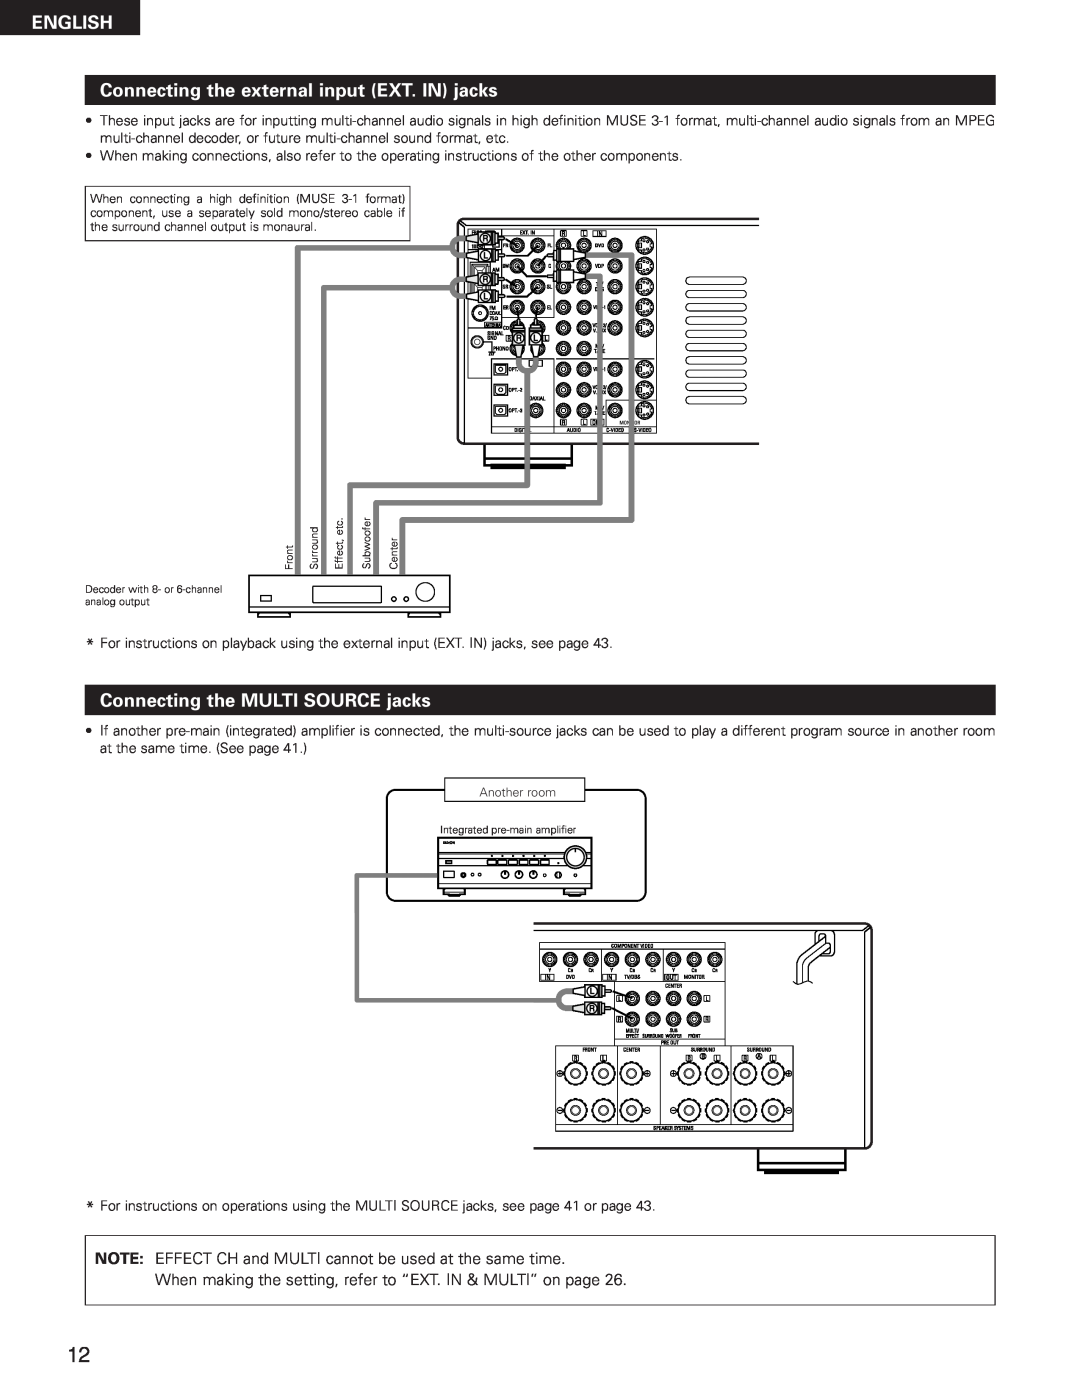 Denon AVR-3300 manual Connecting the external input EXT. IN jacks, Connecting the MULTI SOURCE jacks, English, Another room 